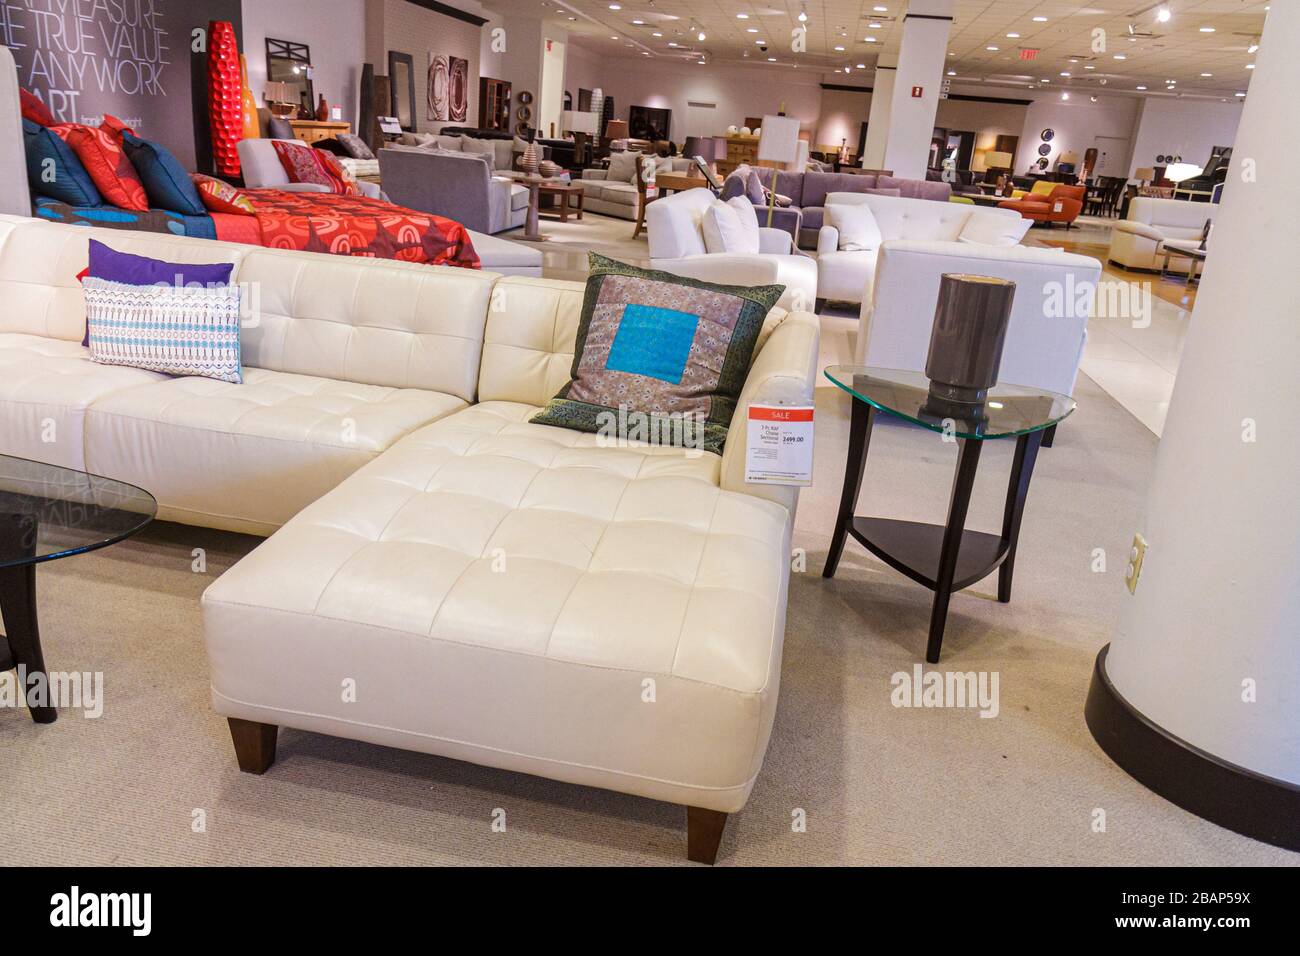 Miami Florida,Aventura,Macy's department store,furniture,sofa,retail products,display case sale,merchandise,packaging,brands,shopping shopper shoppers Stock Photo